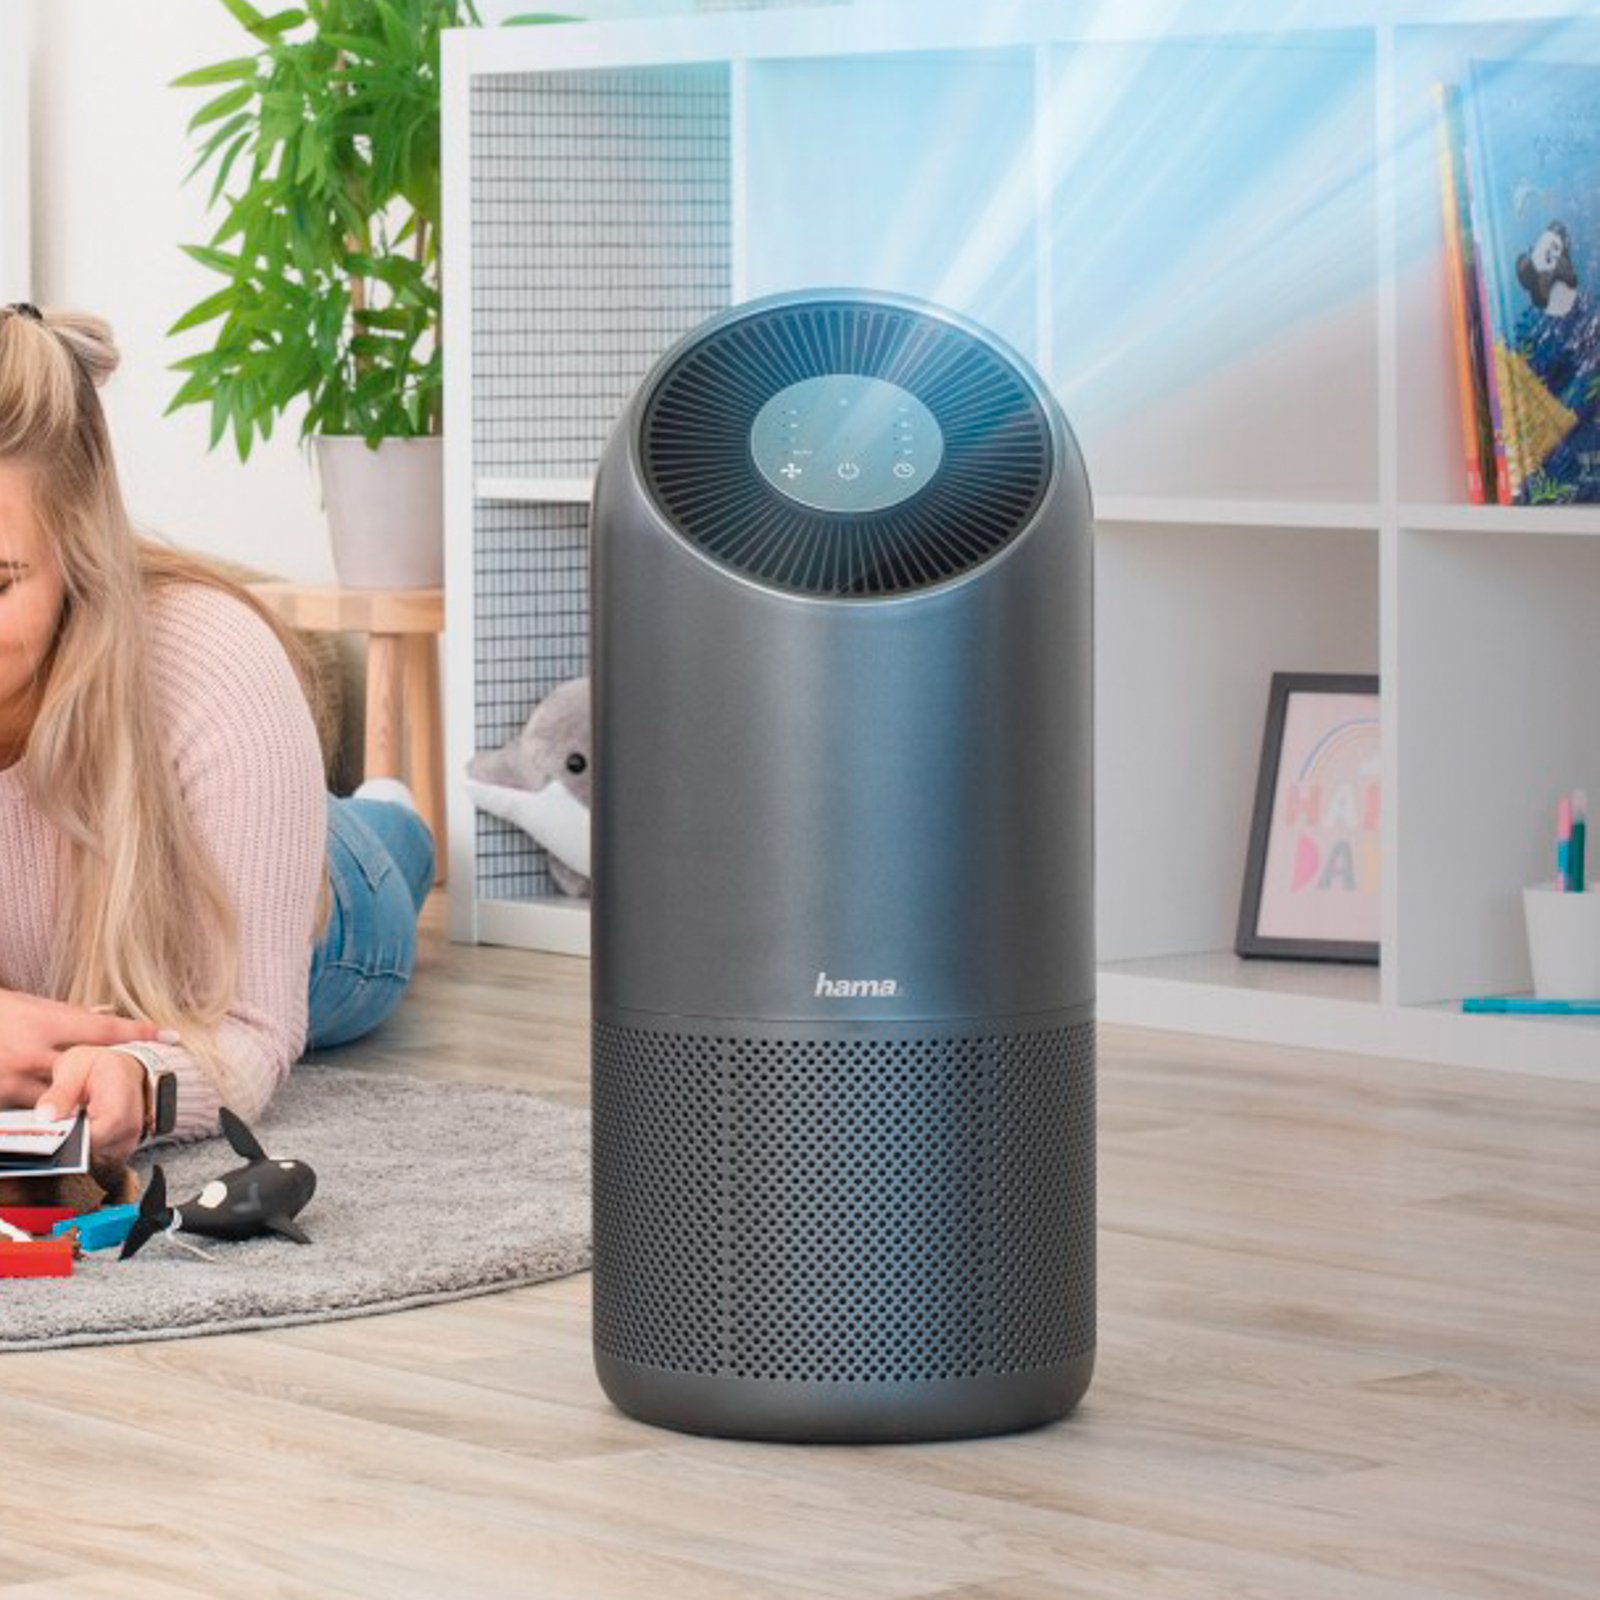 Hama Smart air purifier, HEPA, activated charcoal